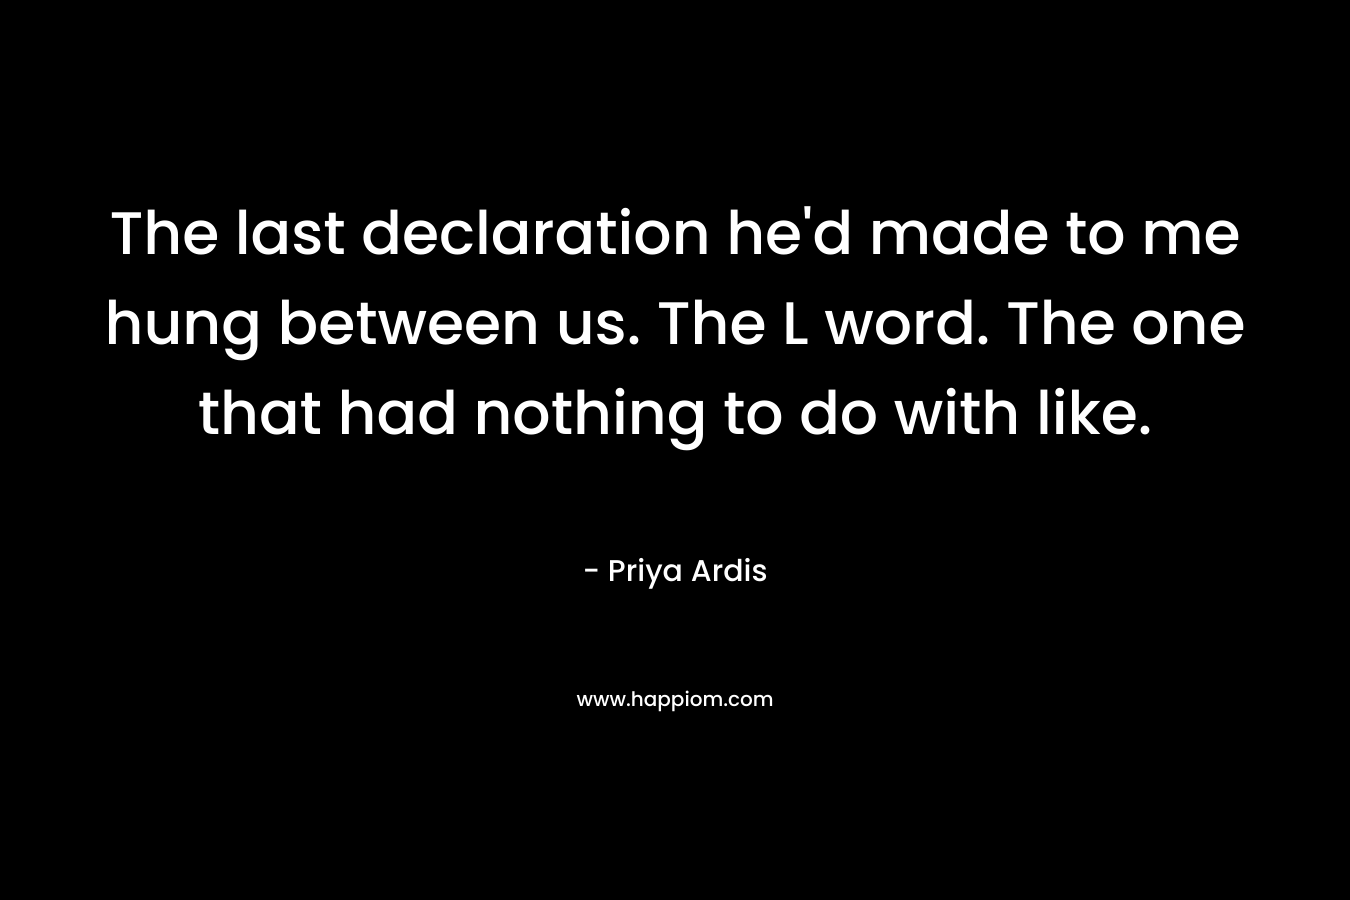 The last declaration he’d made to me hung between us. The L word. The one that had nothing to do with like. – Priya Ardis